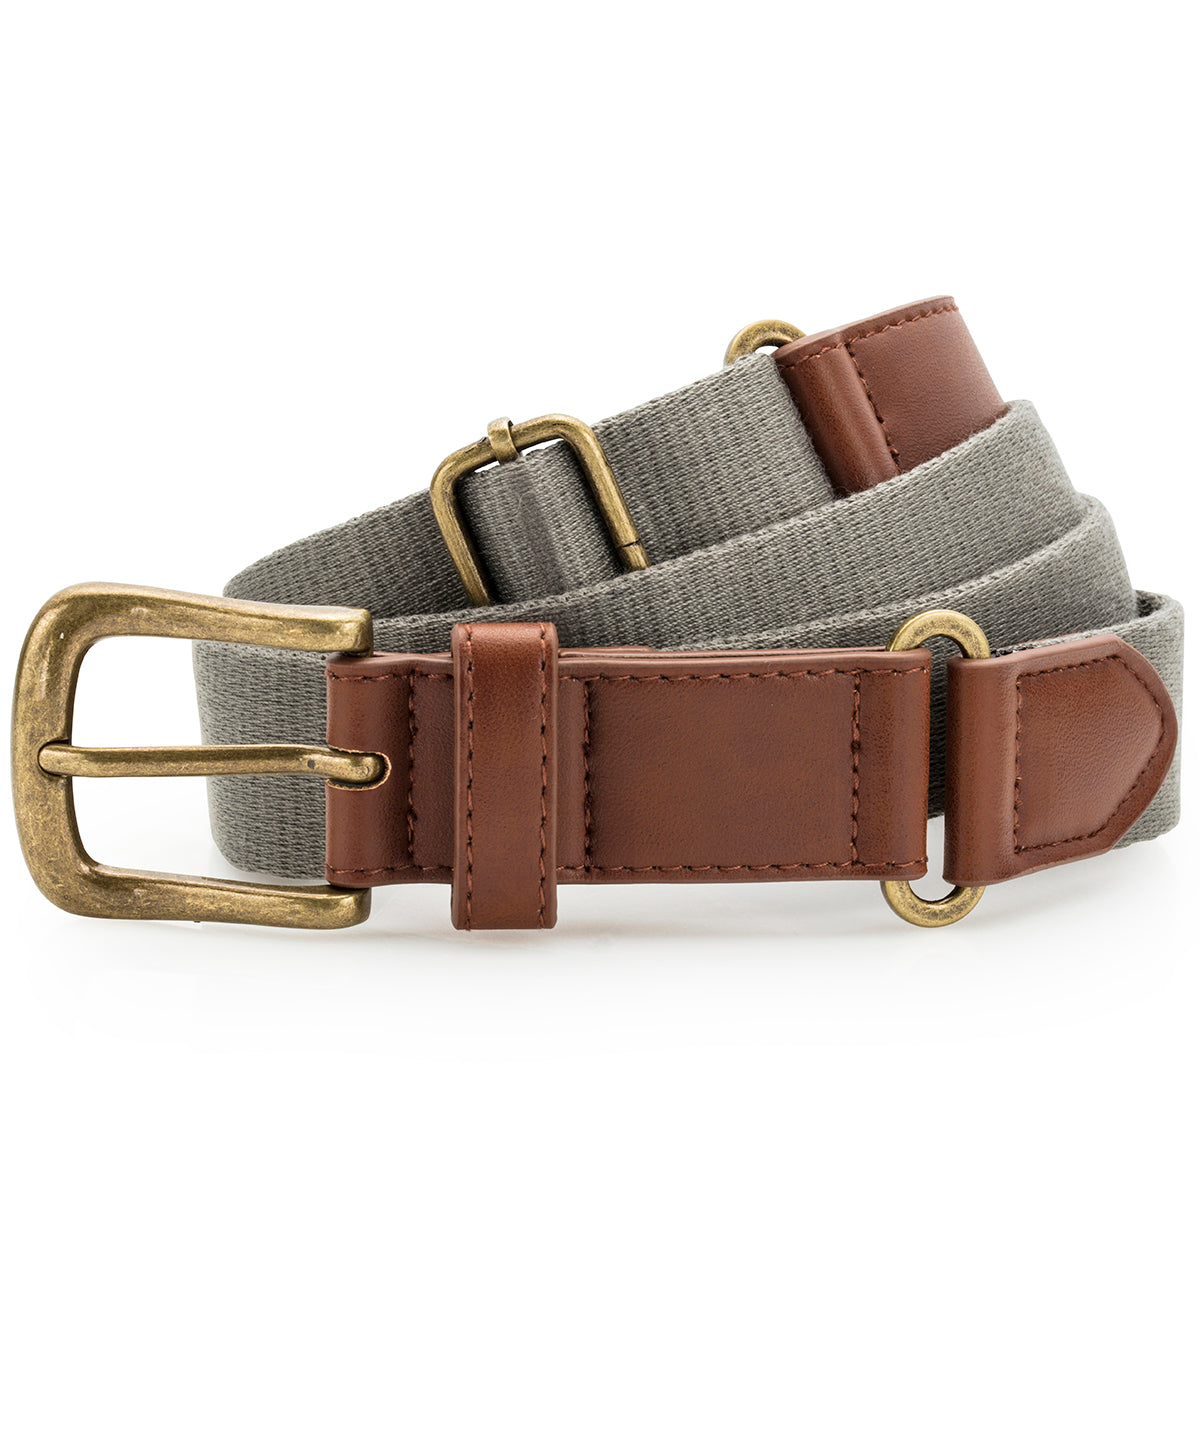 Belti - Faux Leather And Canvas Belt